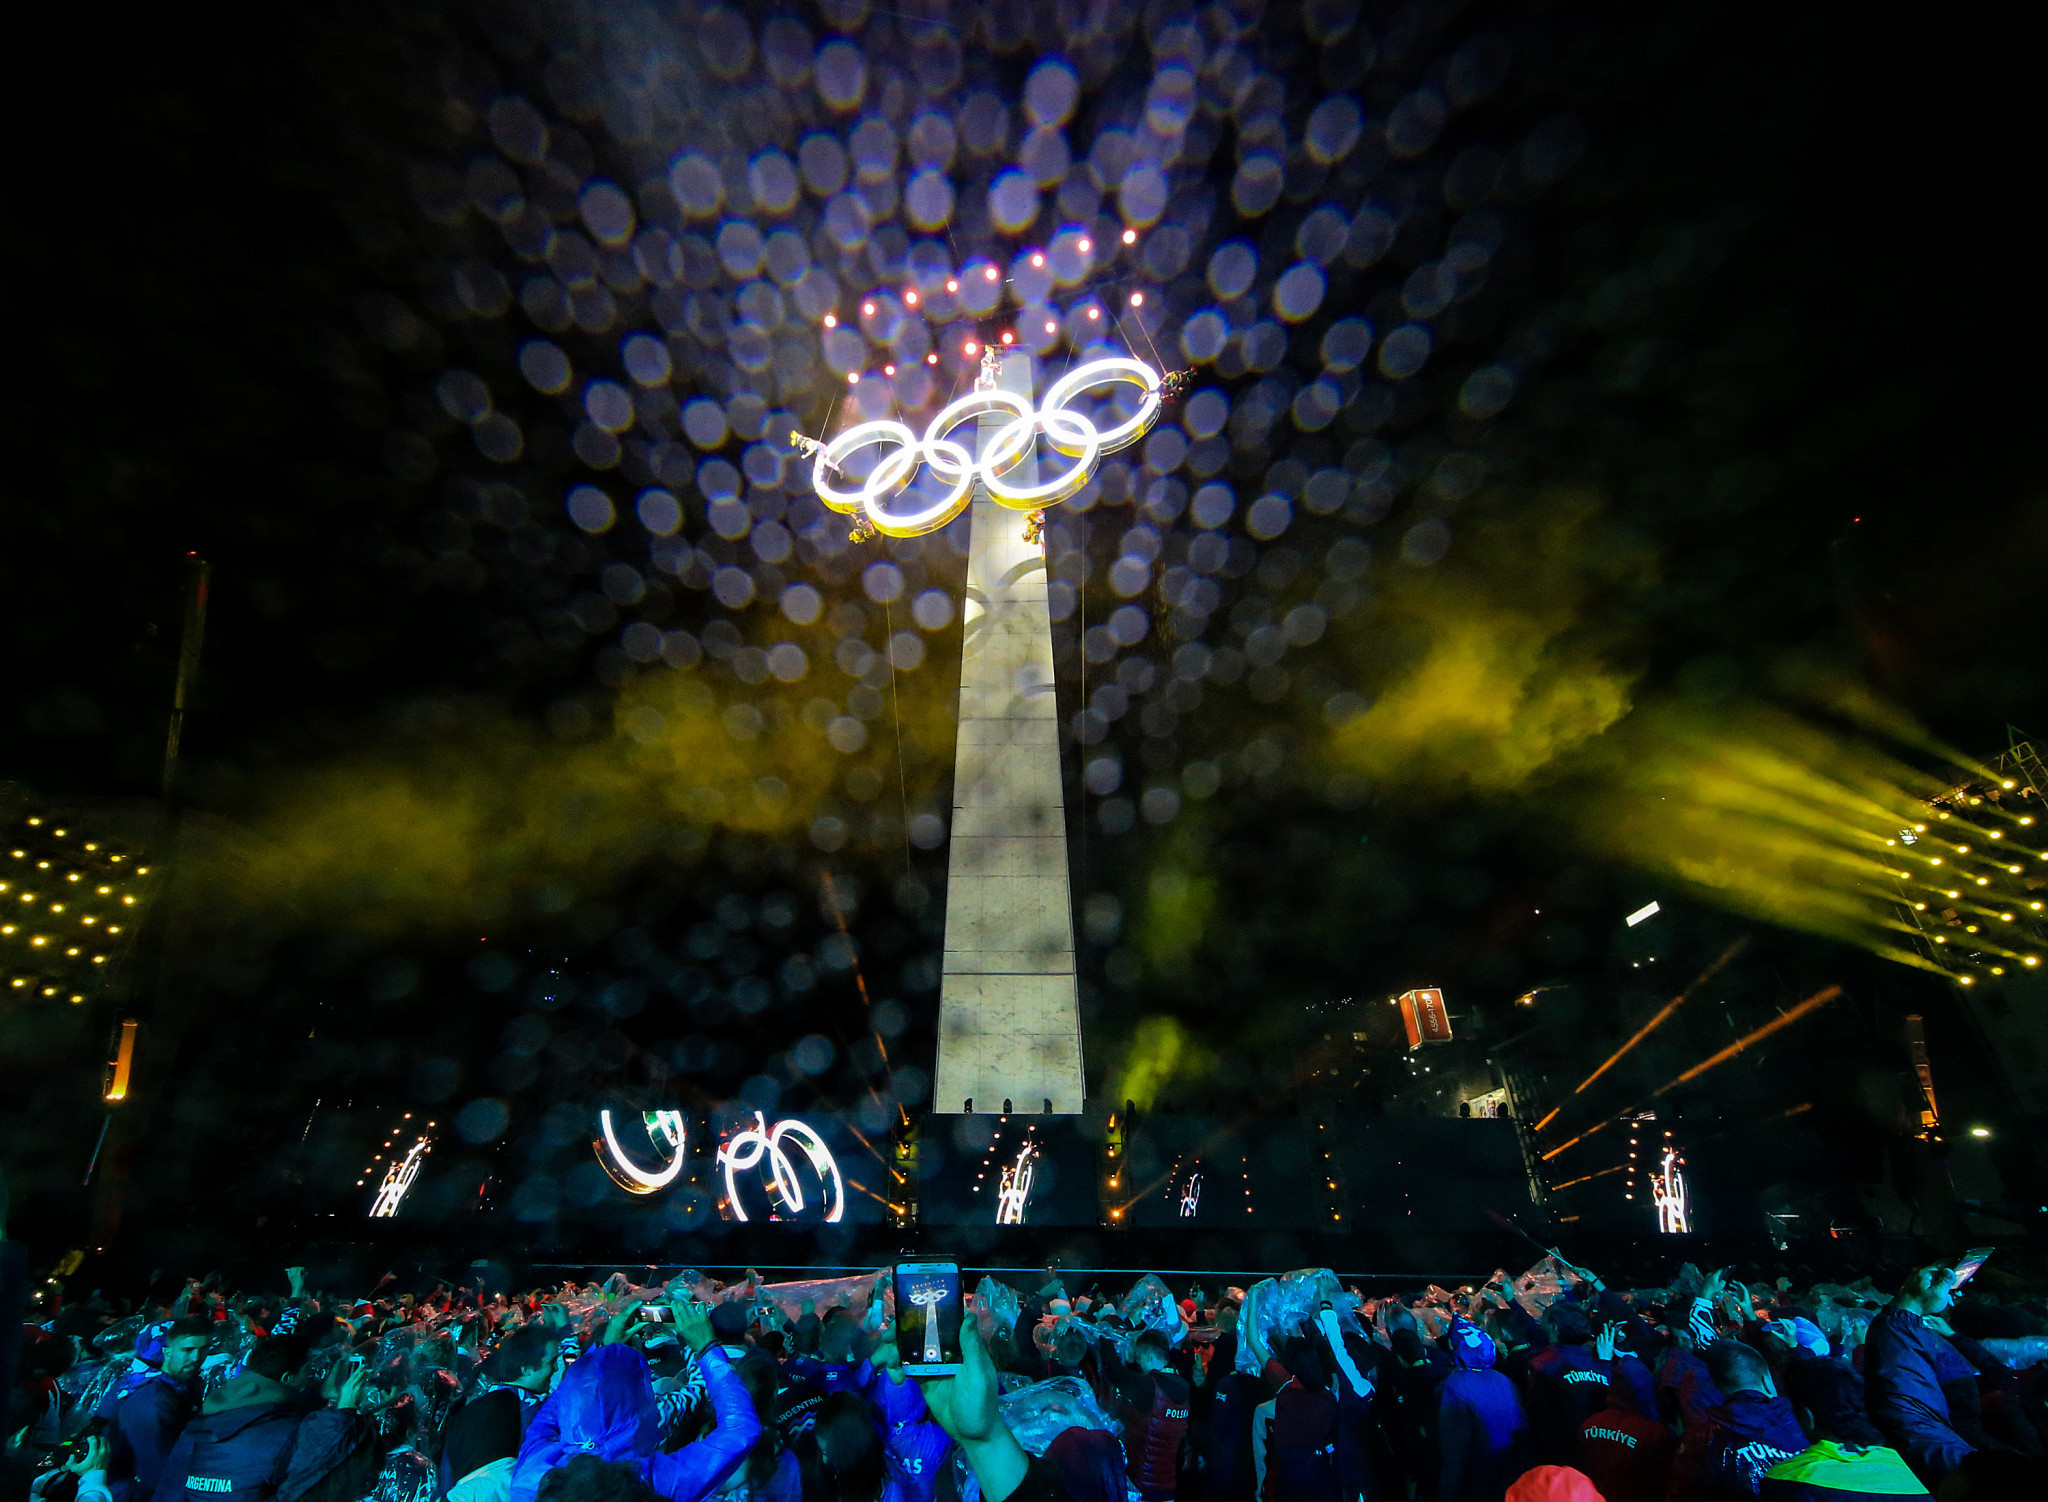 An outdoor Opening Ceremony for the Buenos Aires 2018 Youth Olympic Games made use of the city's famous Obelisk ©Getty Images